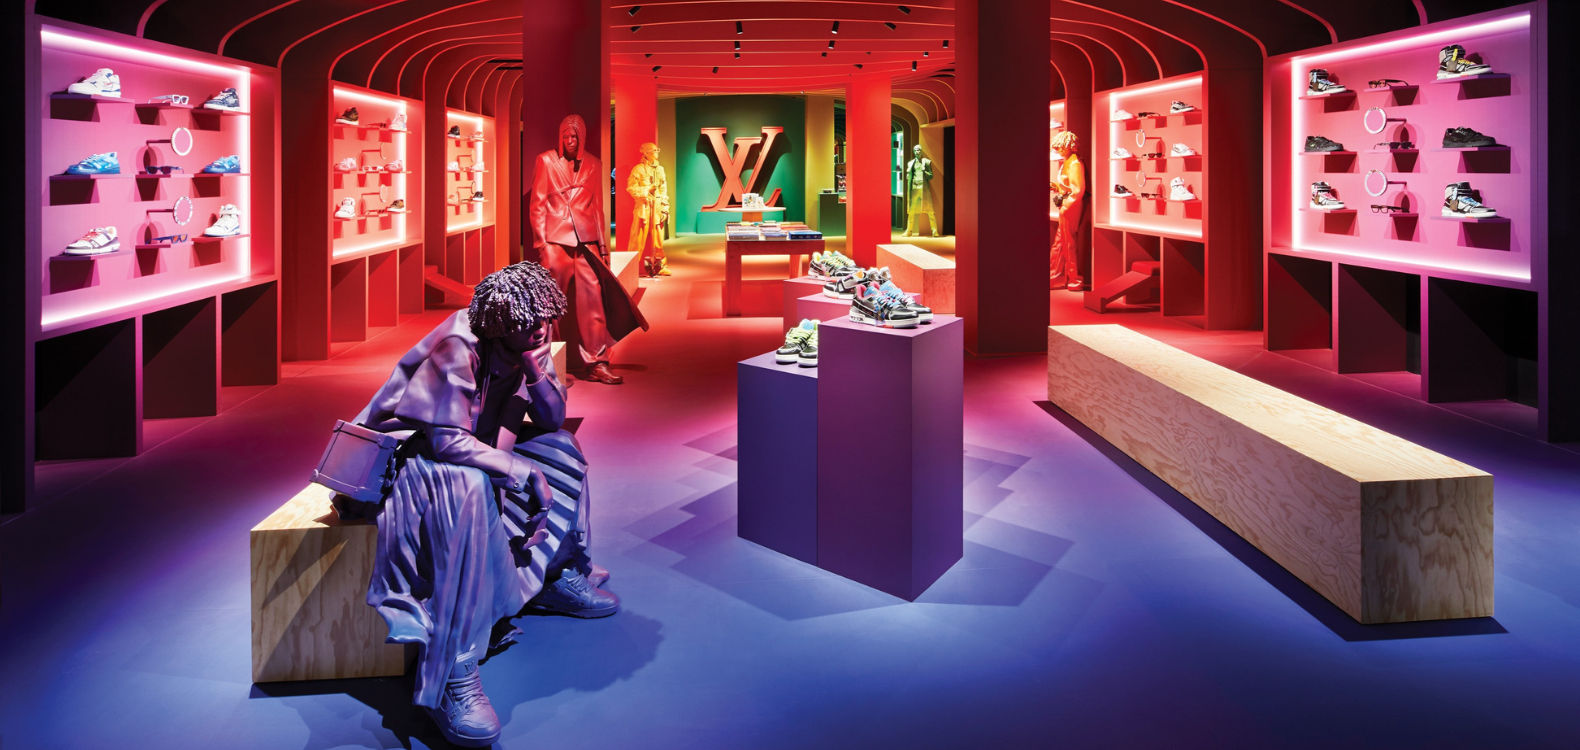 Louis Vuitton: ‘Walk in the Park’ makes sustainability look très chic